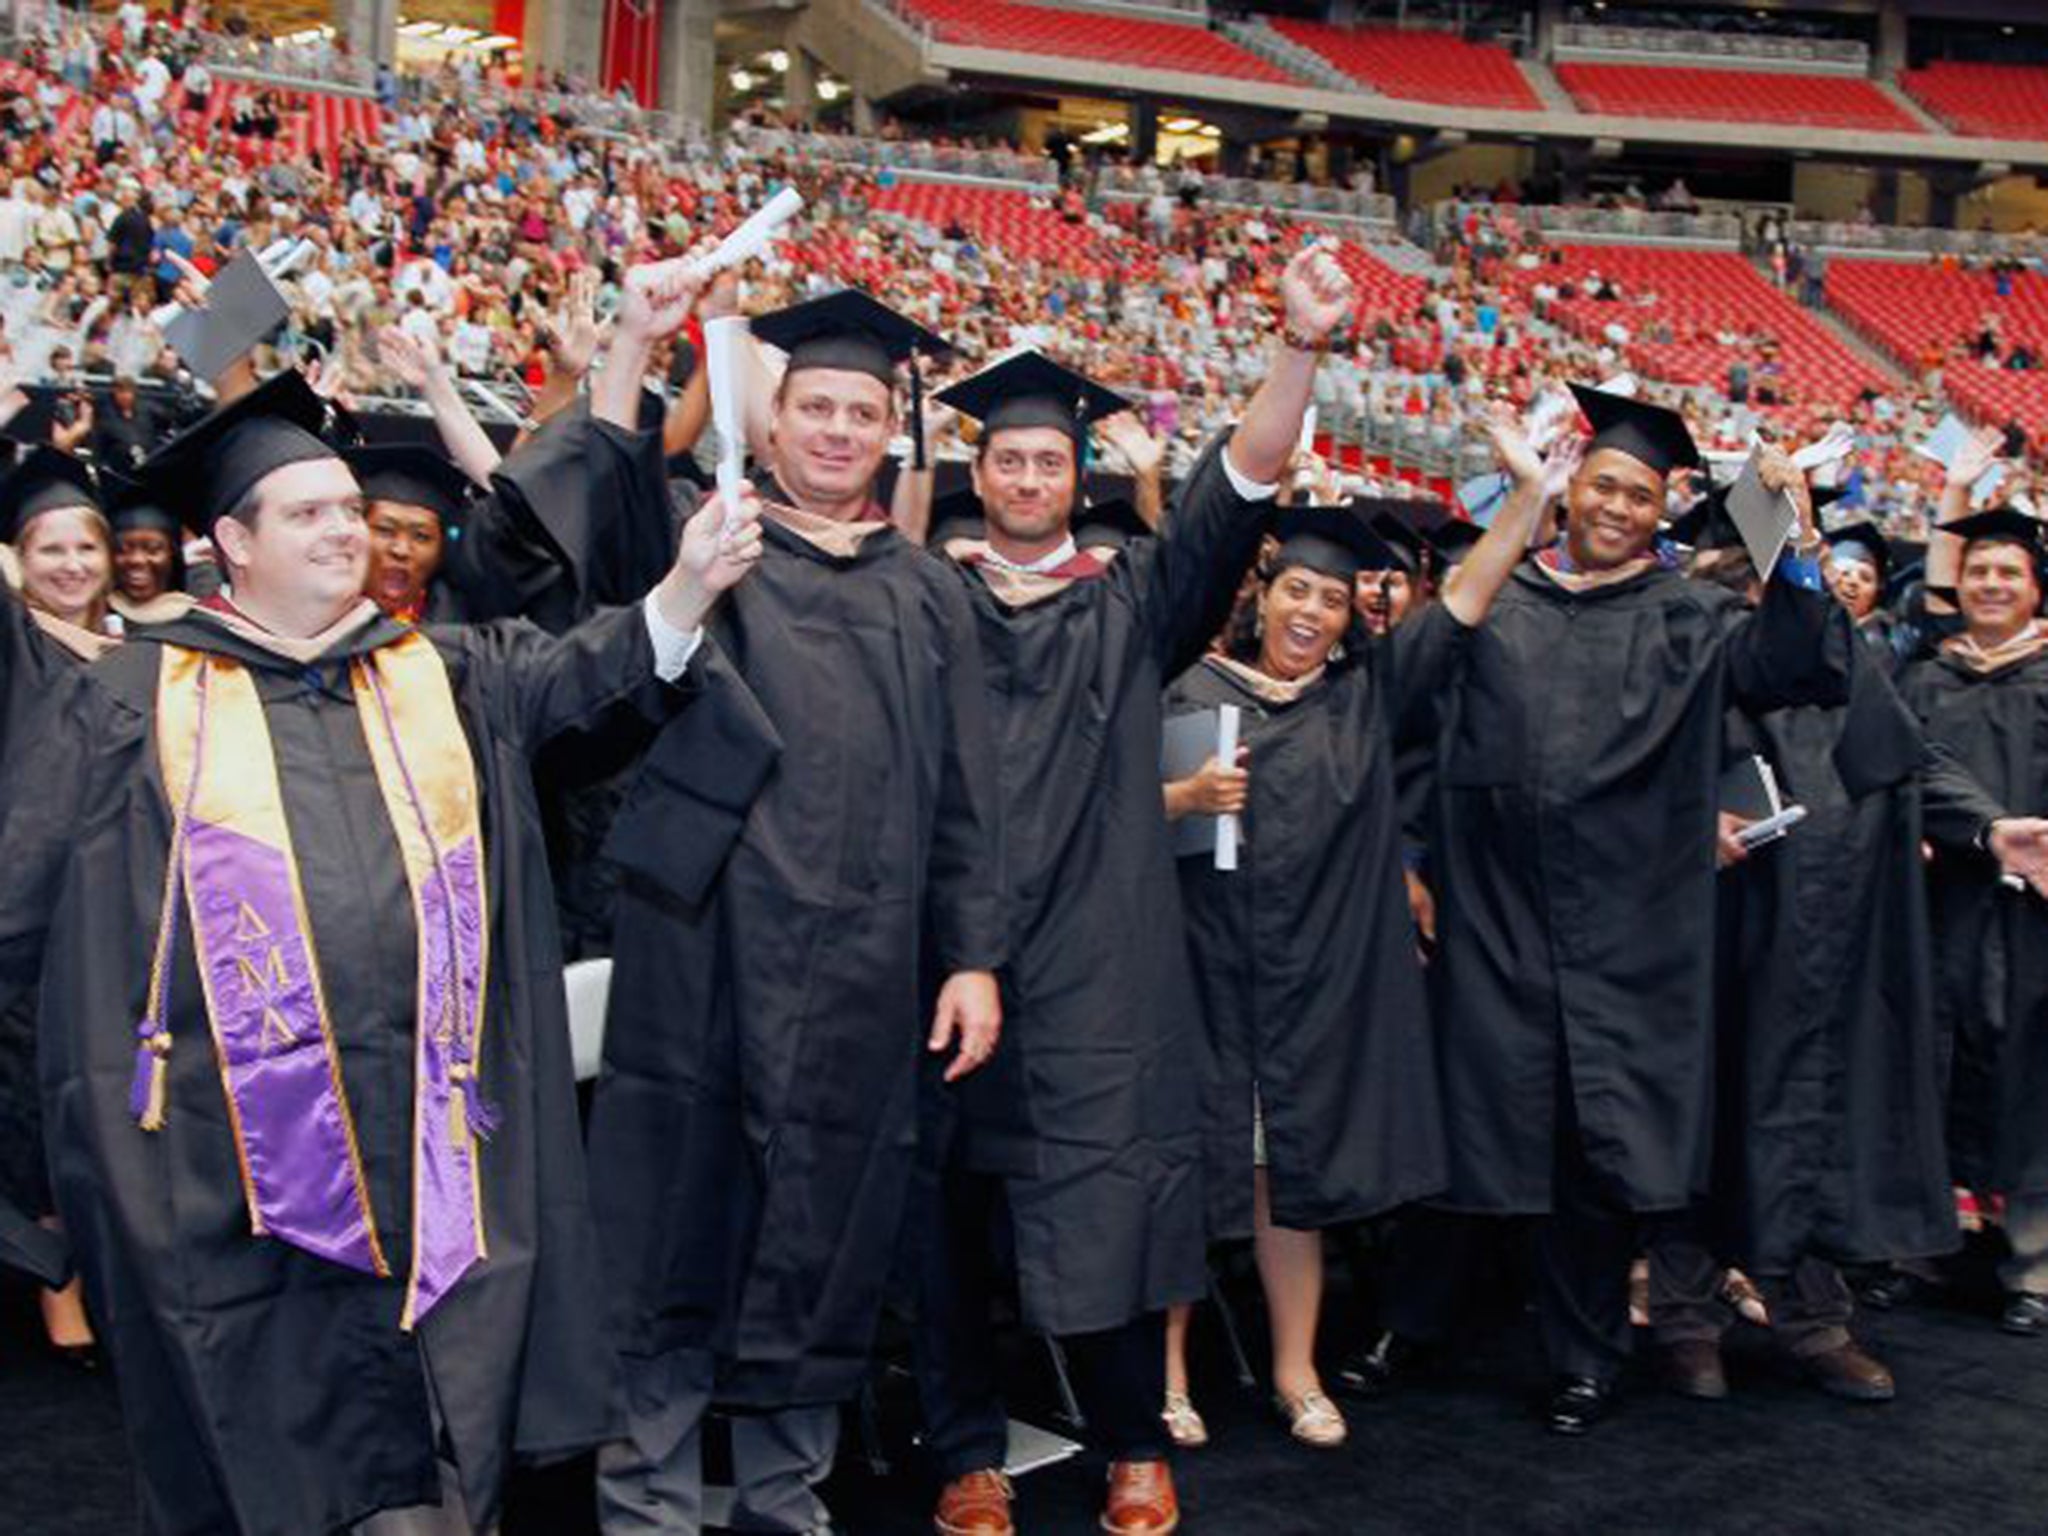 Students show their excitement during the graduation ceremony for the University of Phoenix at the Arizona Cardinals stadium